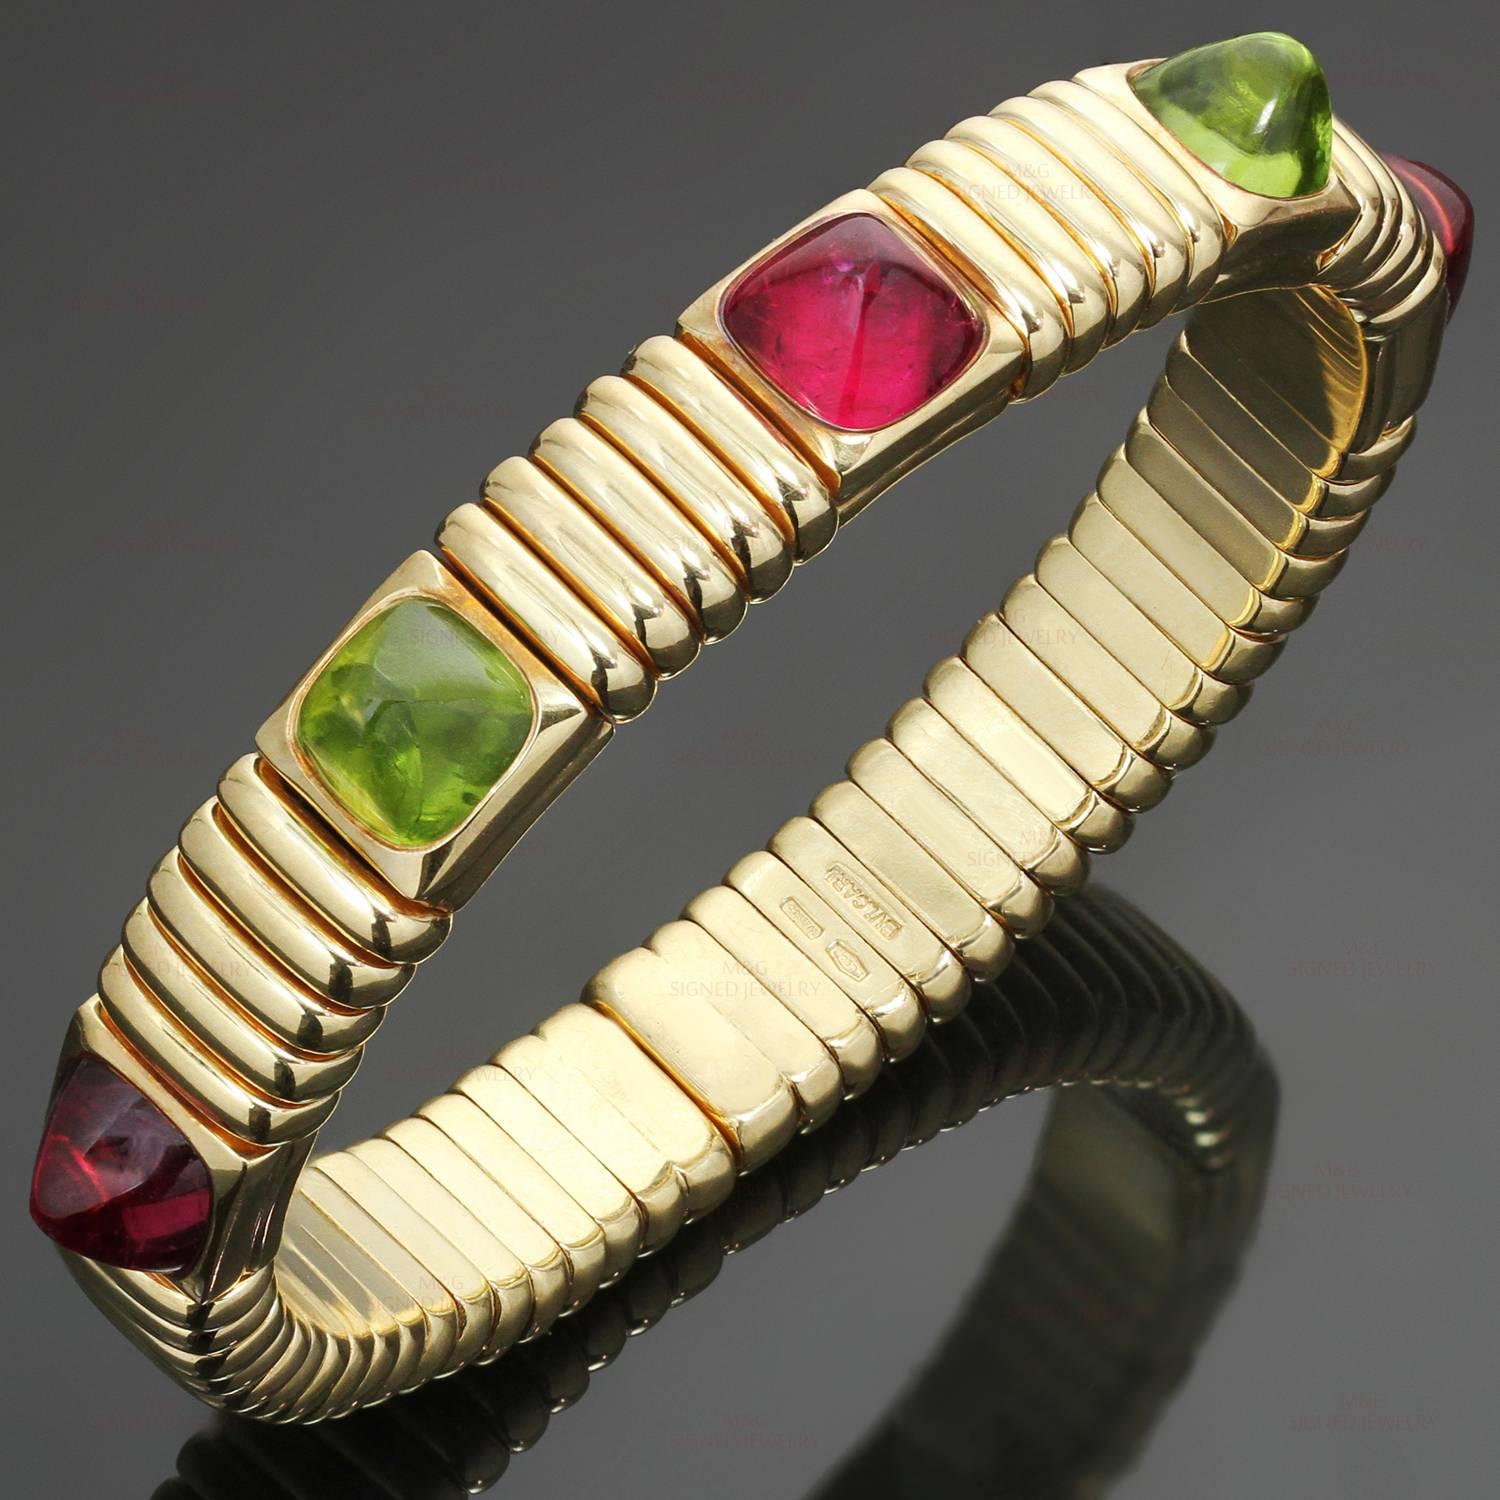 This gorgeous spring cuff bracelet from Bulgari's iconic Tubogas collection features sugarloaf cabochon gemstones - 2 peridots and 3 rubellites, set in 18k yellow gold. Made in Italy circa 1990s. Measurements: 0.38" (10mm) width, 7"